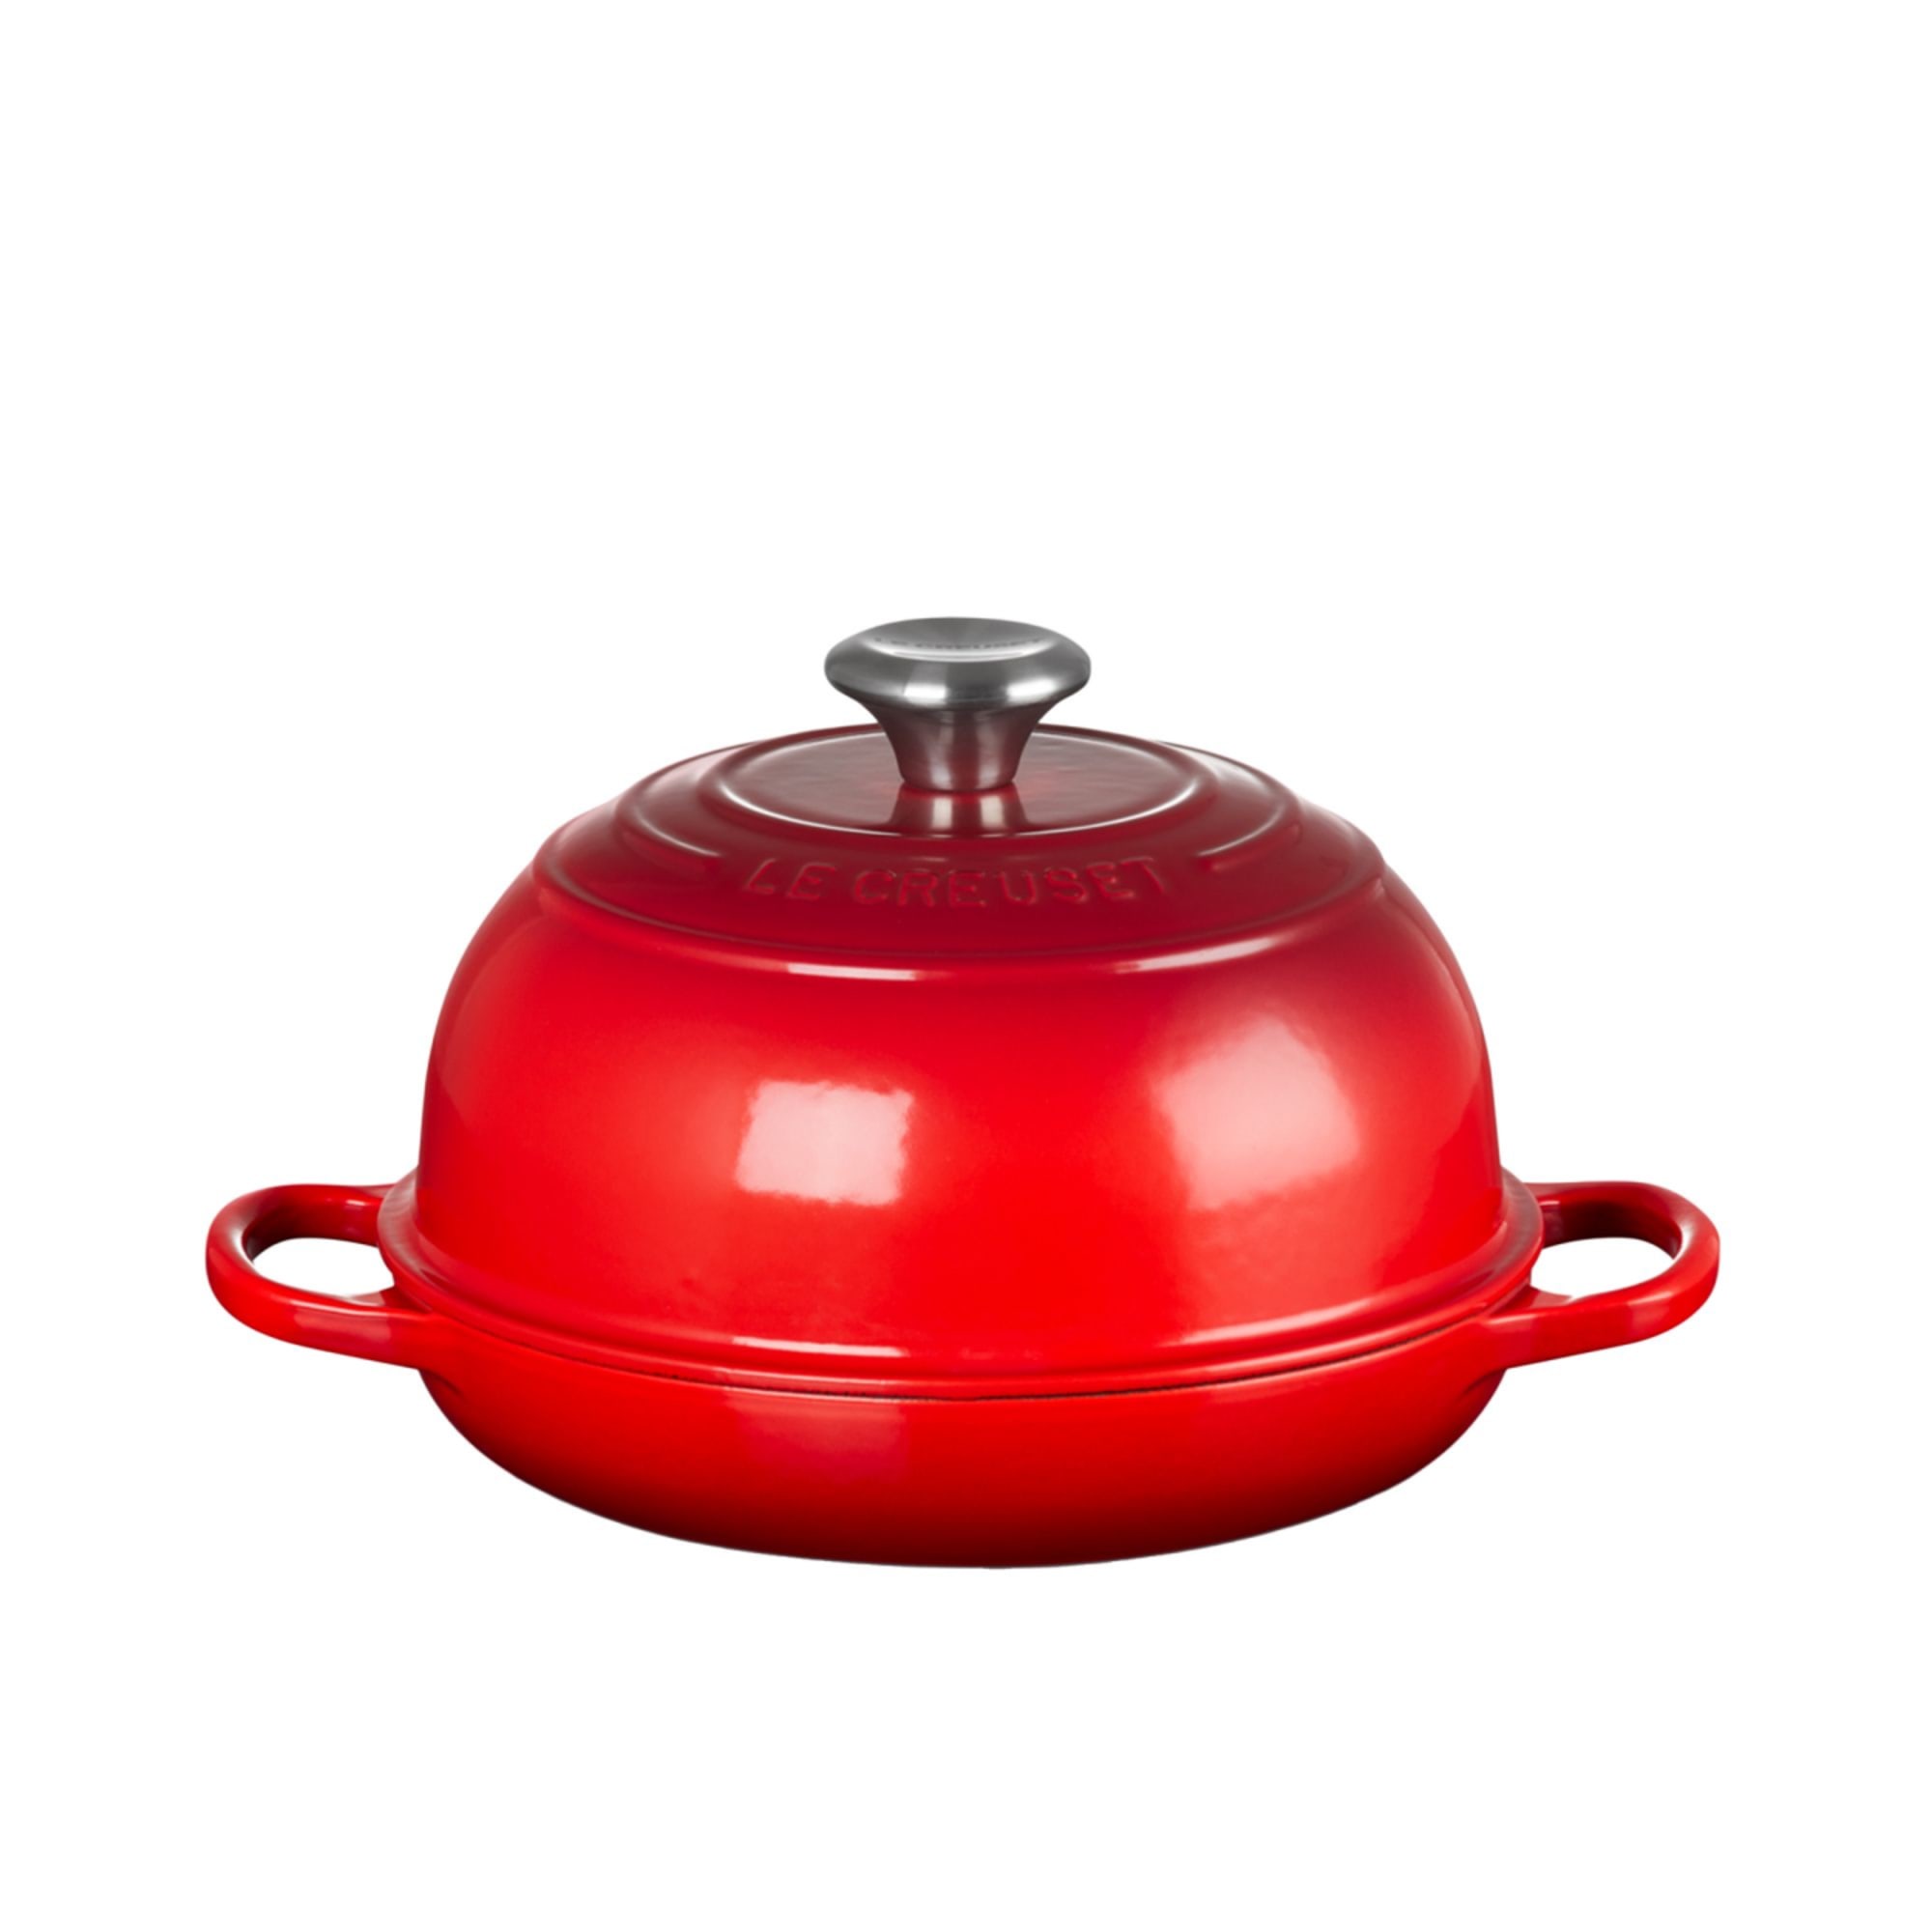 Tefal LOV Enamelled Cast Iron Shallow Casserole Dish with Lid, 28cm, 3.8L,  Dutch Oven, All Hob Types, Cast Iron Pot, Cooking Pots, Dishwasher Safe